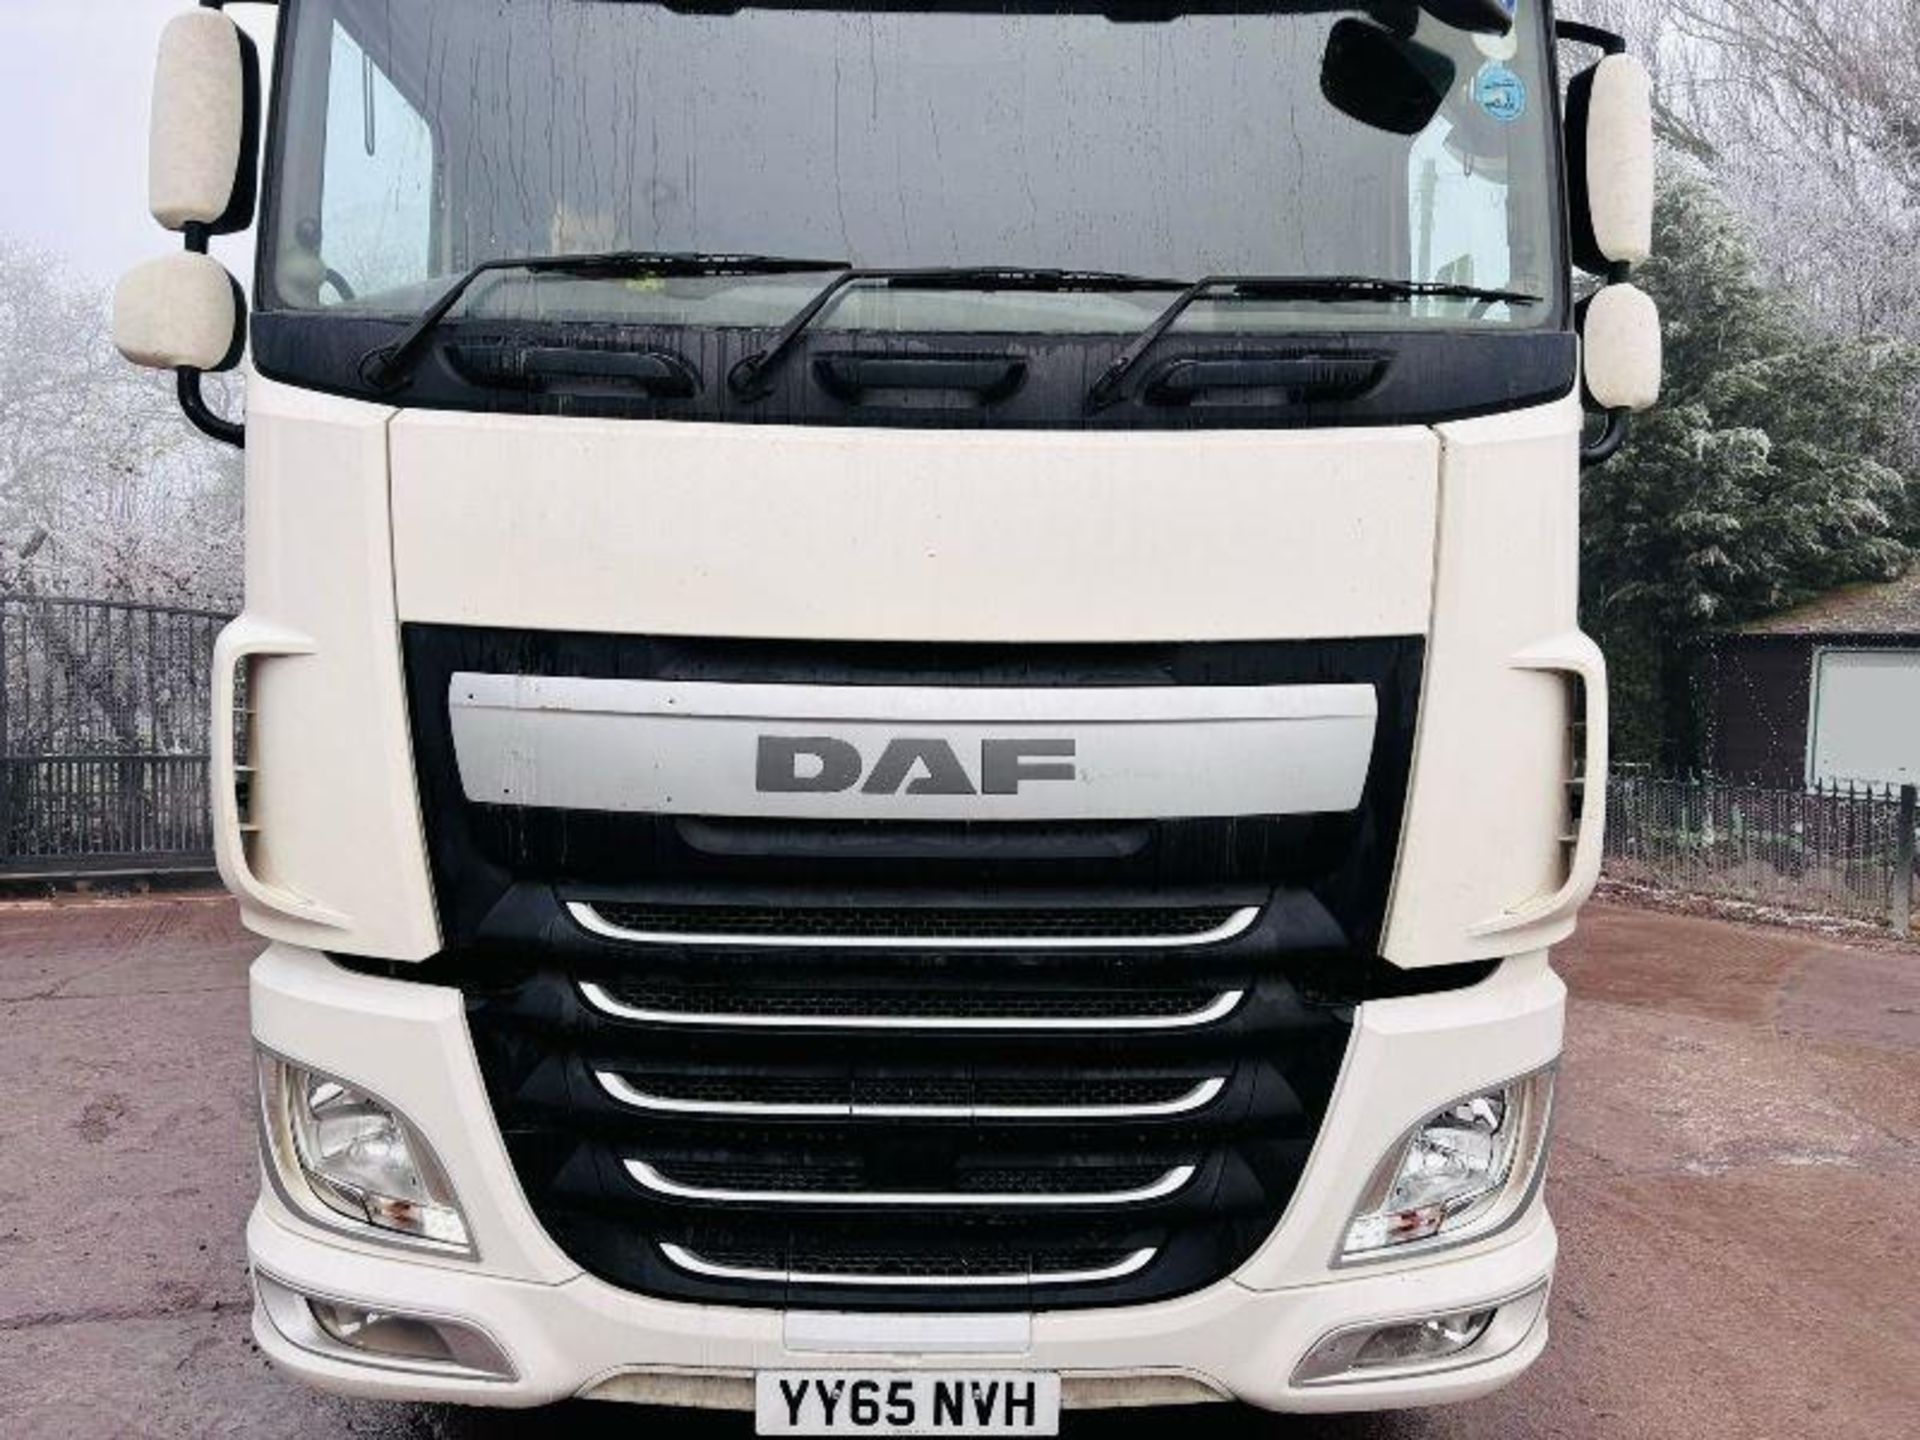 DAF XF510 6X2 TRACTOR UNIT *YEAR 2016, MOT'D TILL APRIL 2024* - READING 700328 KMS - Image 18 of 18